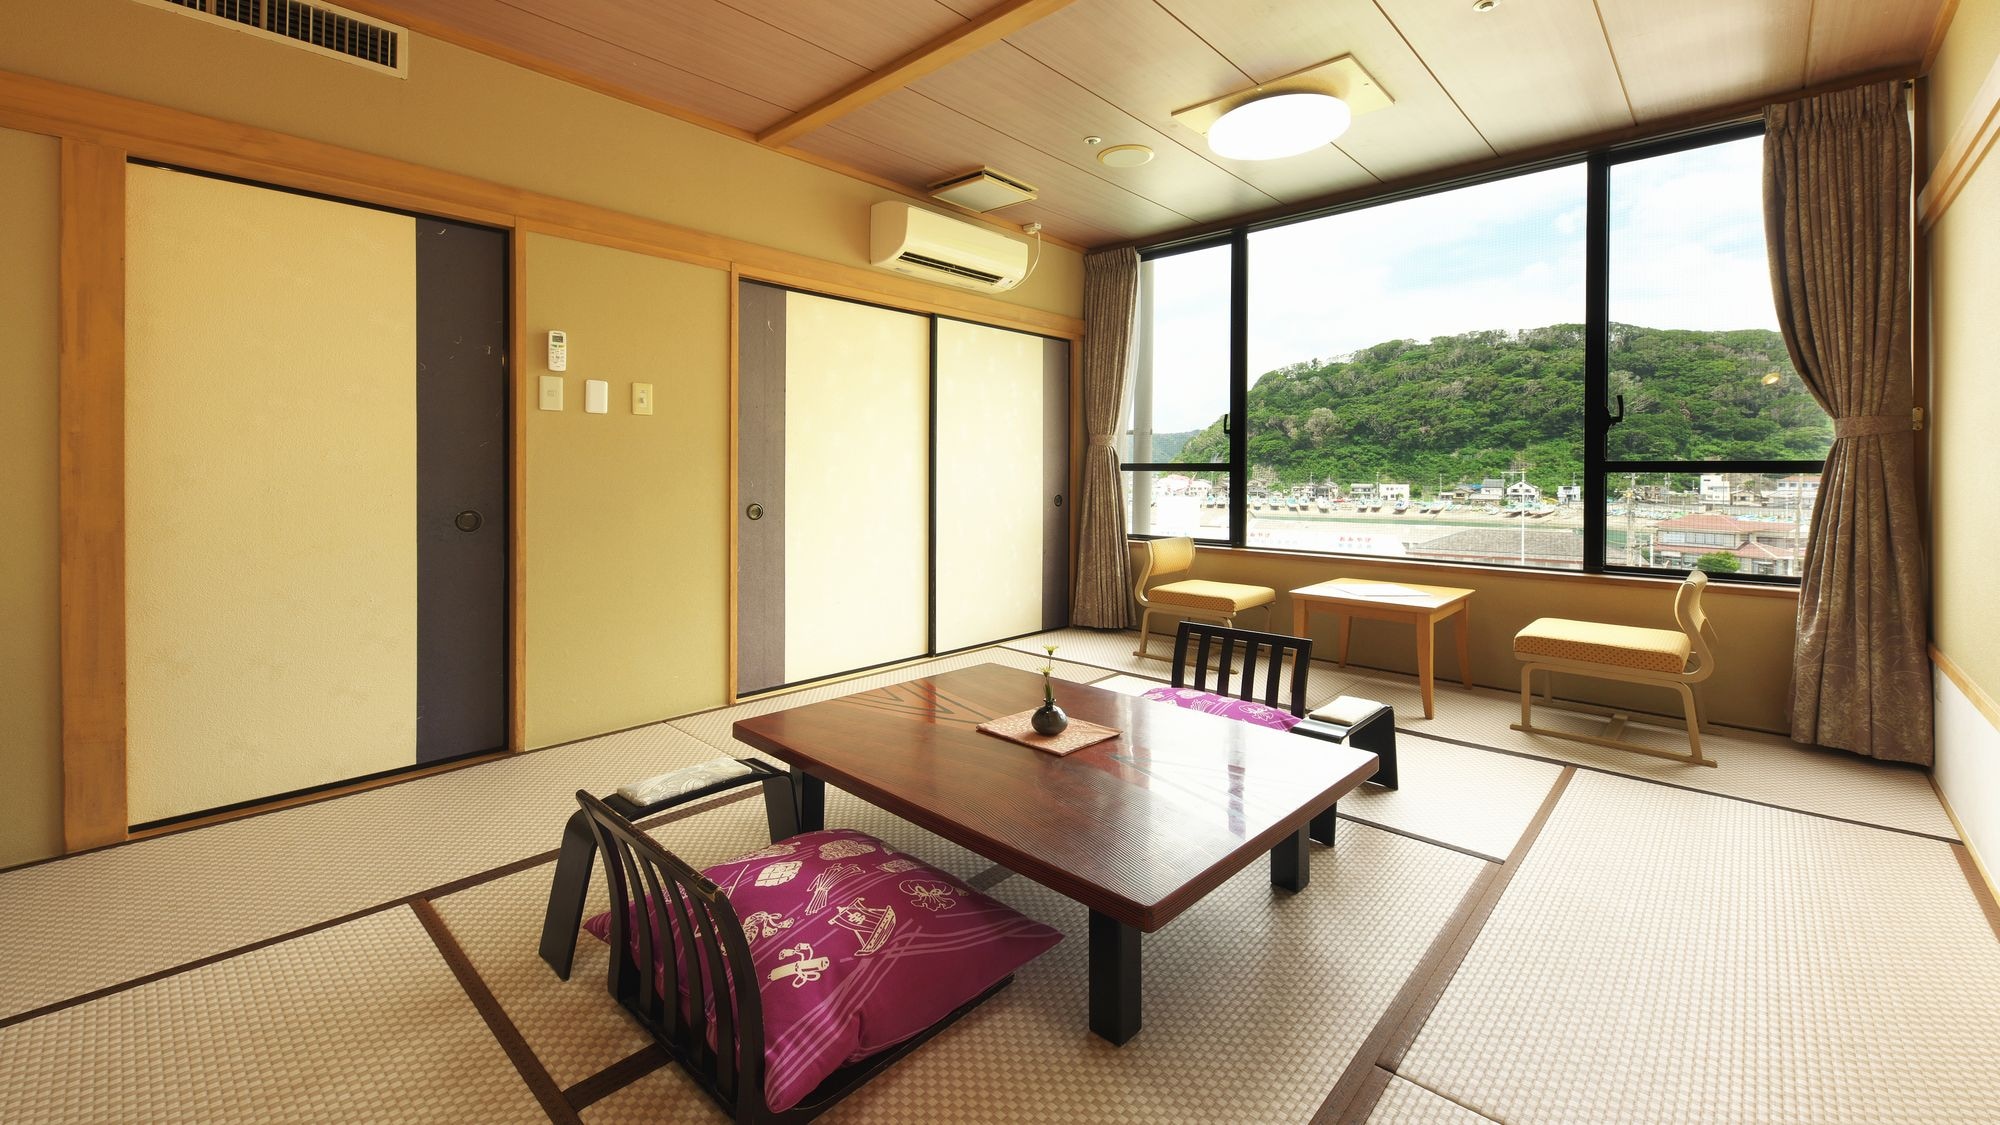 [Yumetei] Japanese-style room on the harbor side 10 tatami mats <Harbor view> This is a guest room on the harbor side for those who do not care about the view. I can hardly see the sea